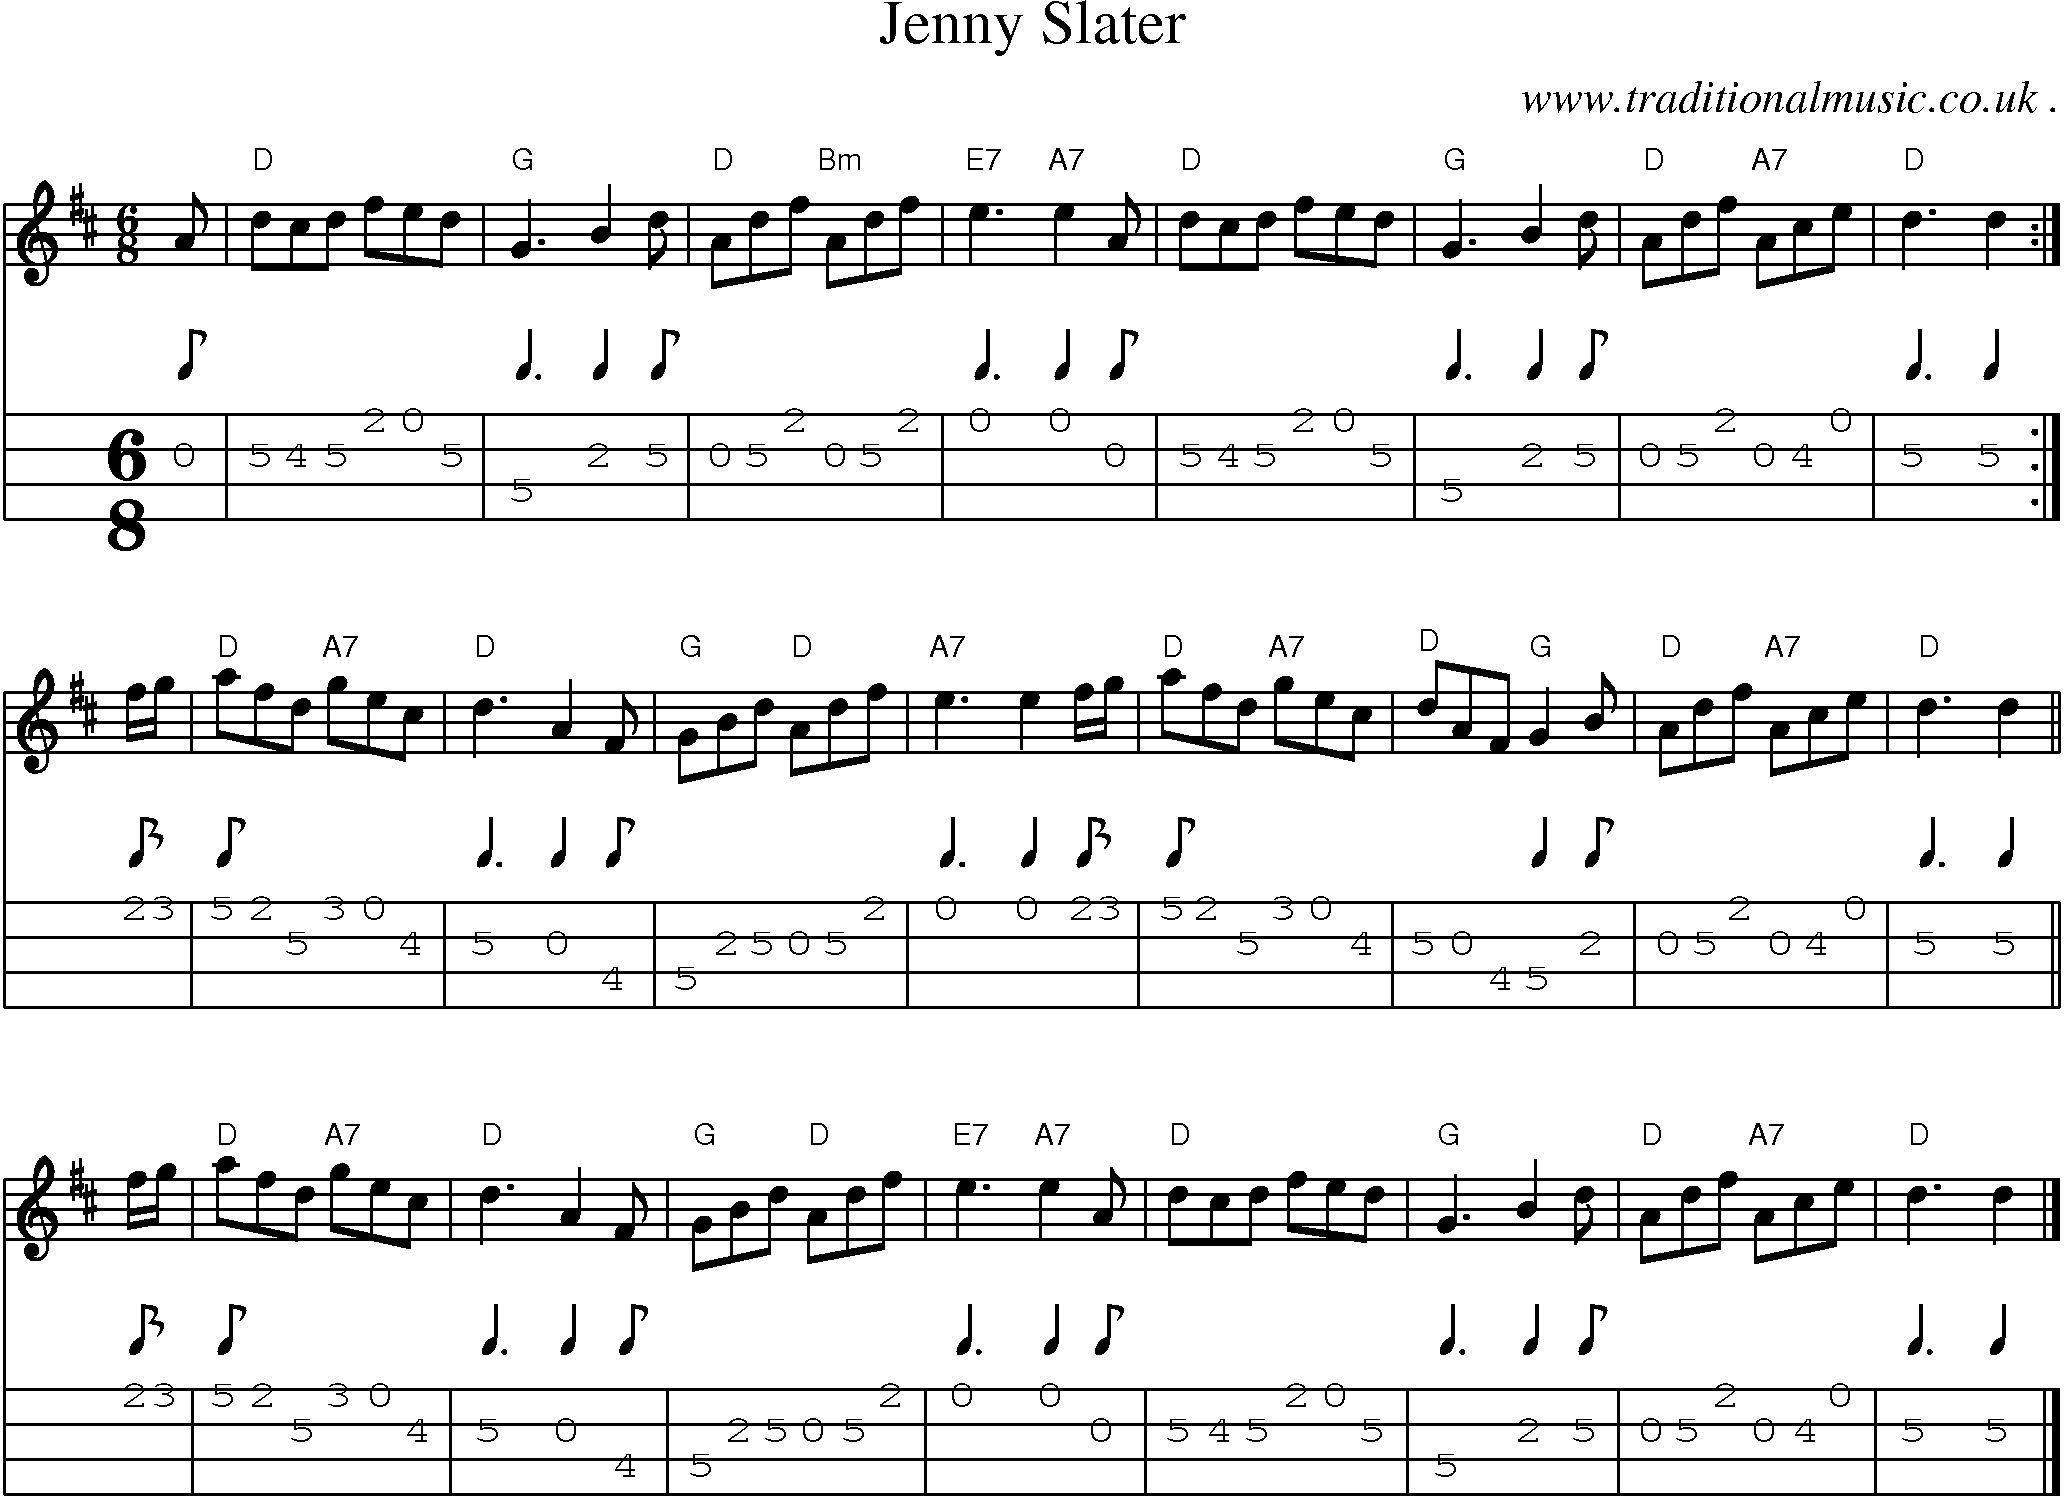 Sheet-music  score, Chords and Mandolin Tabs for Jenny Slater